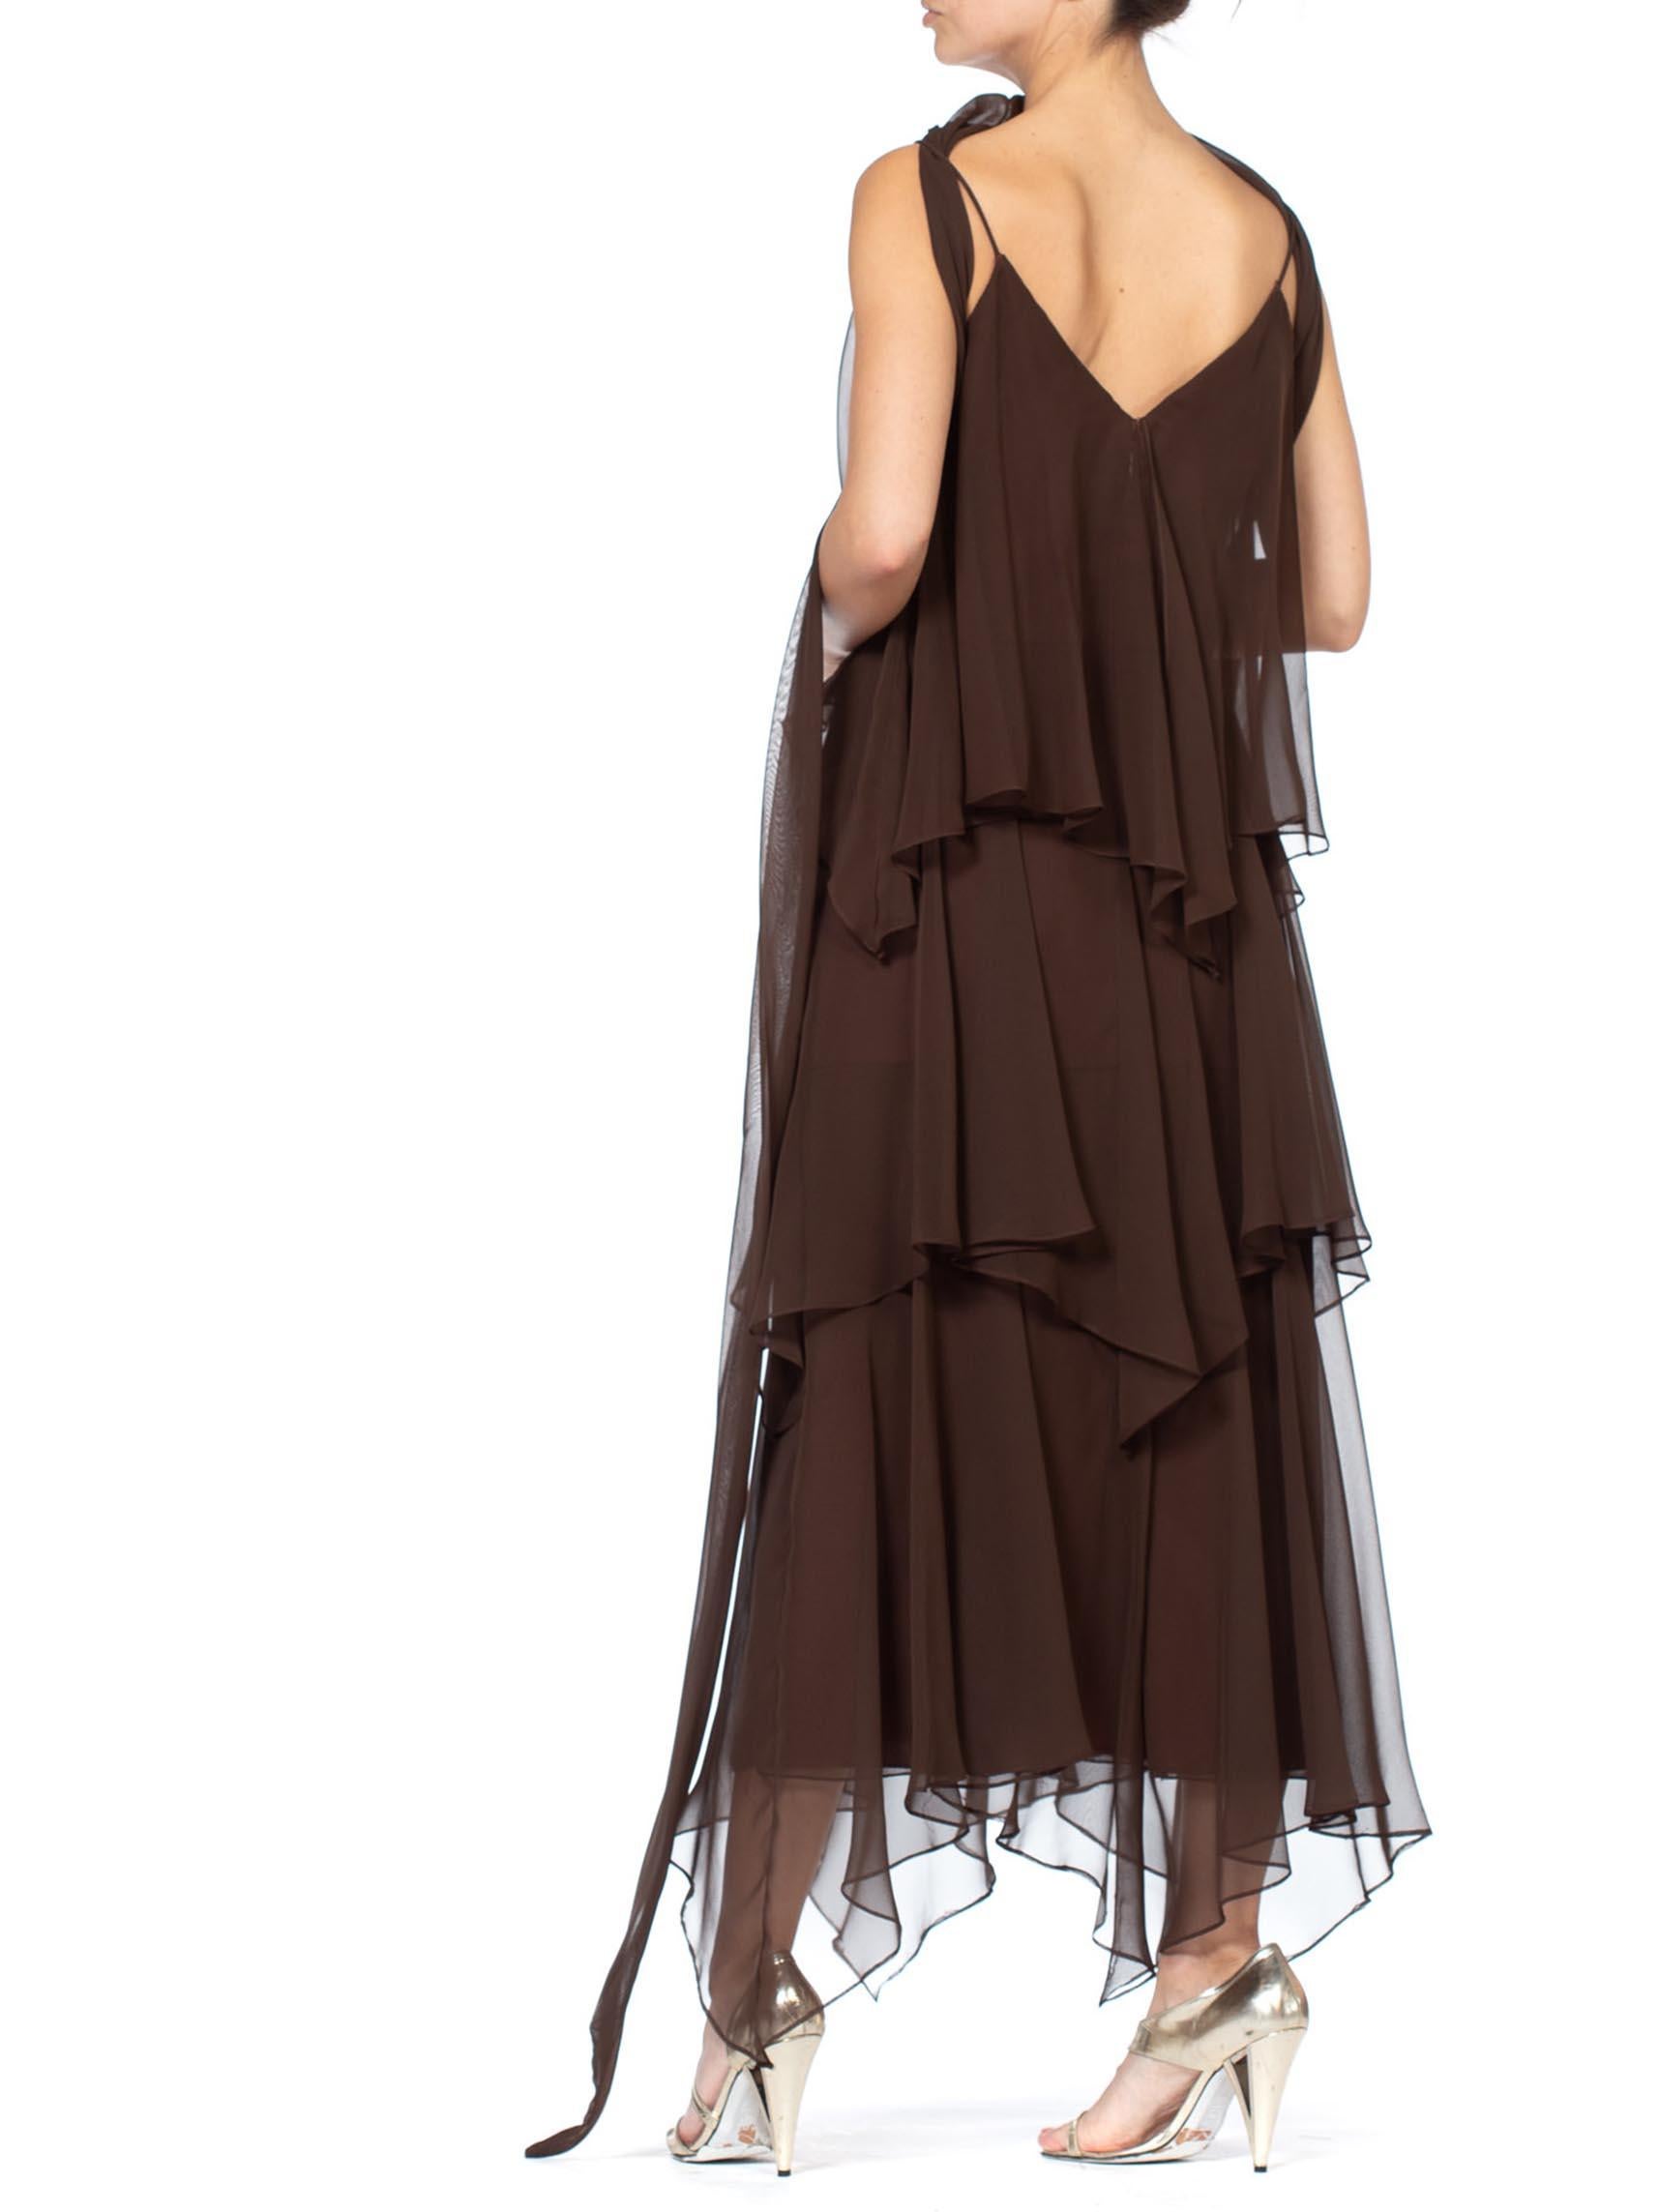 1970S ANTHONY MUTO Chocolate Brown Polyester Chiffon Disco Flapper Dress With S 2